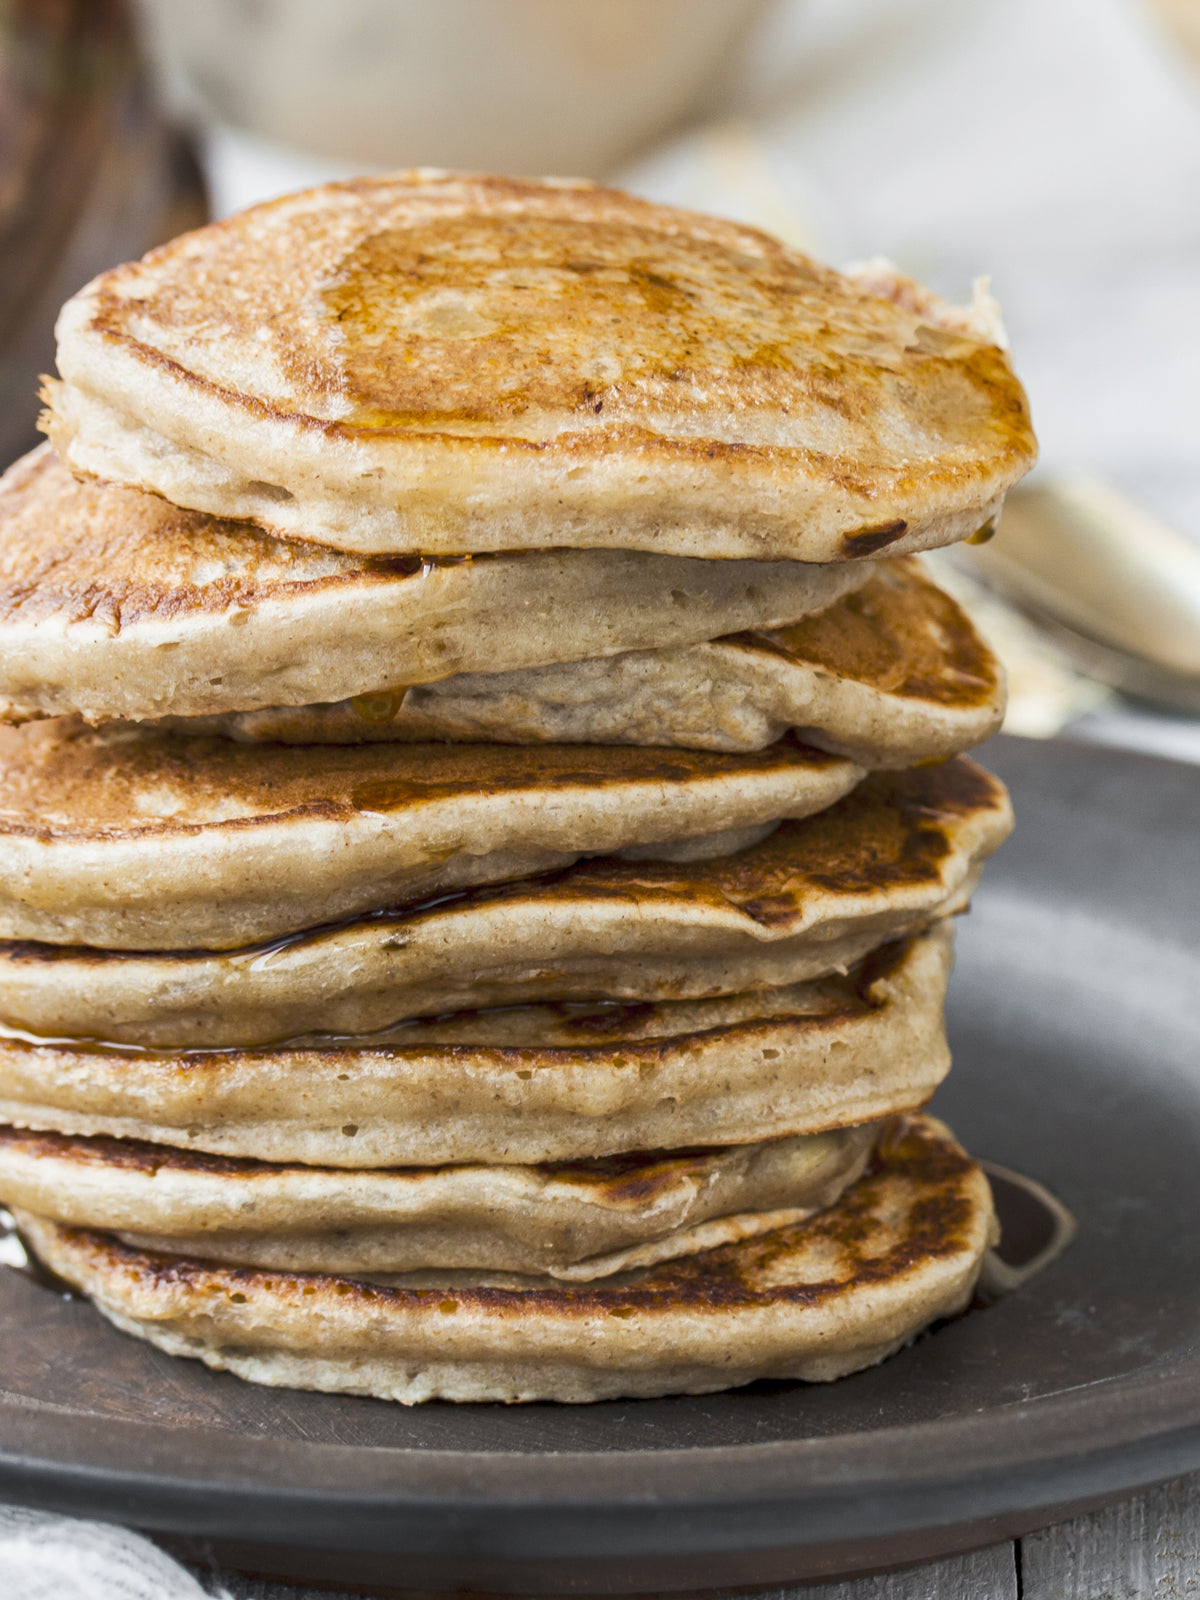 vegan pancake recipe made with 3 ingredients: plant-based milk, banana and old fashioned oats